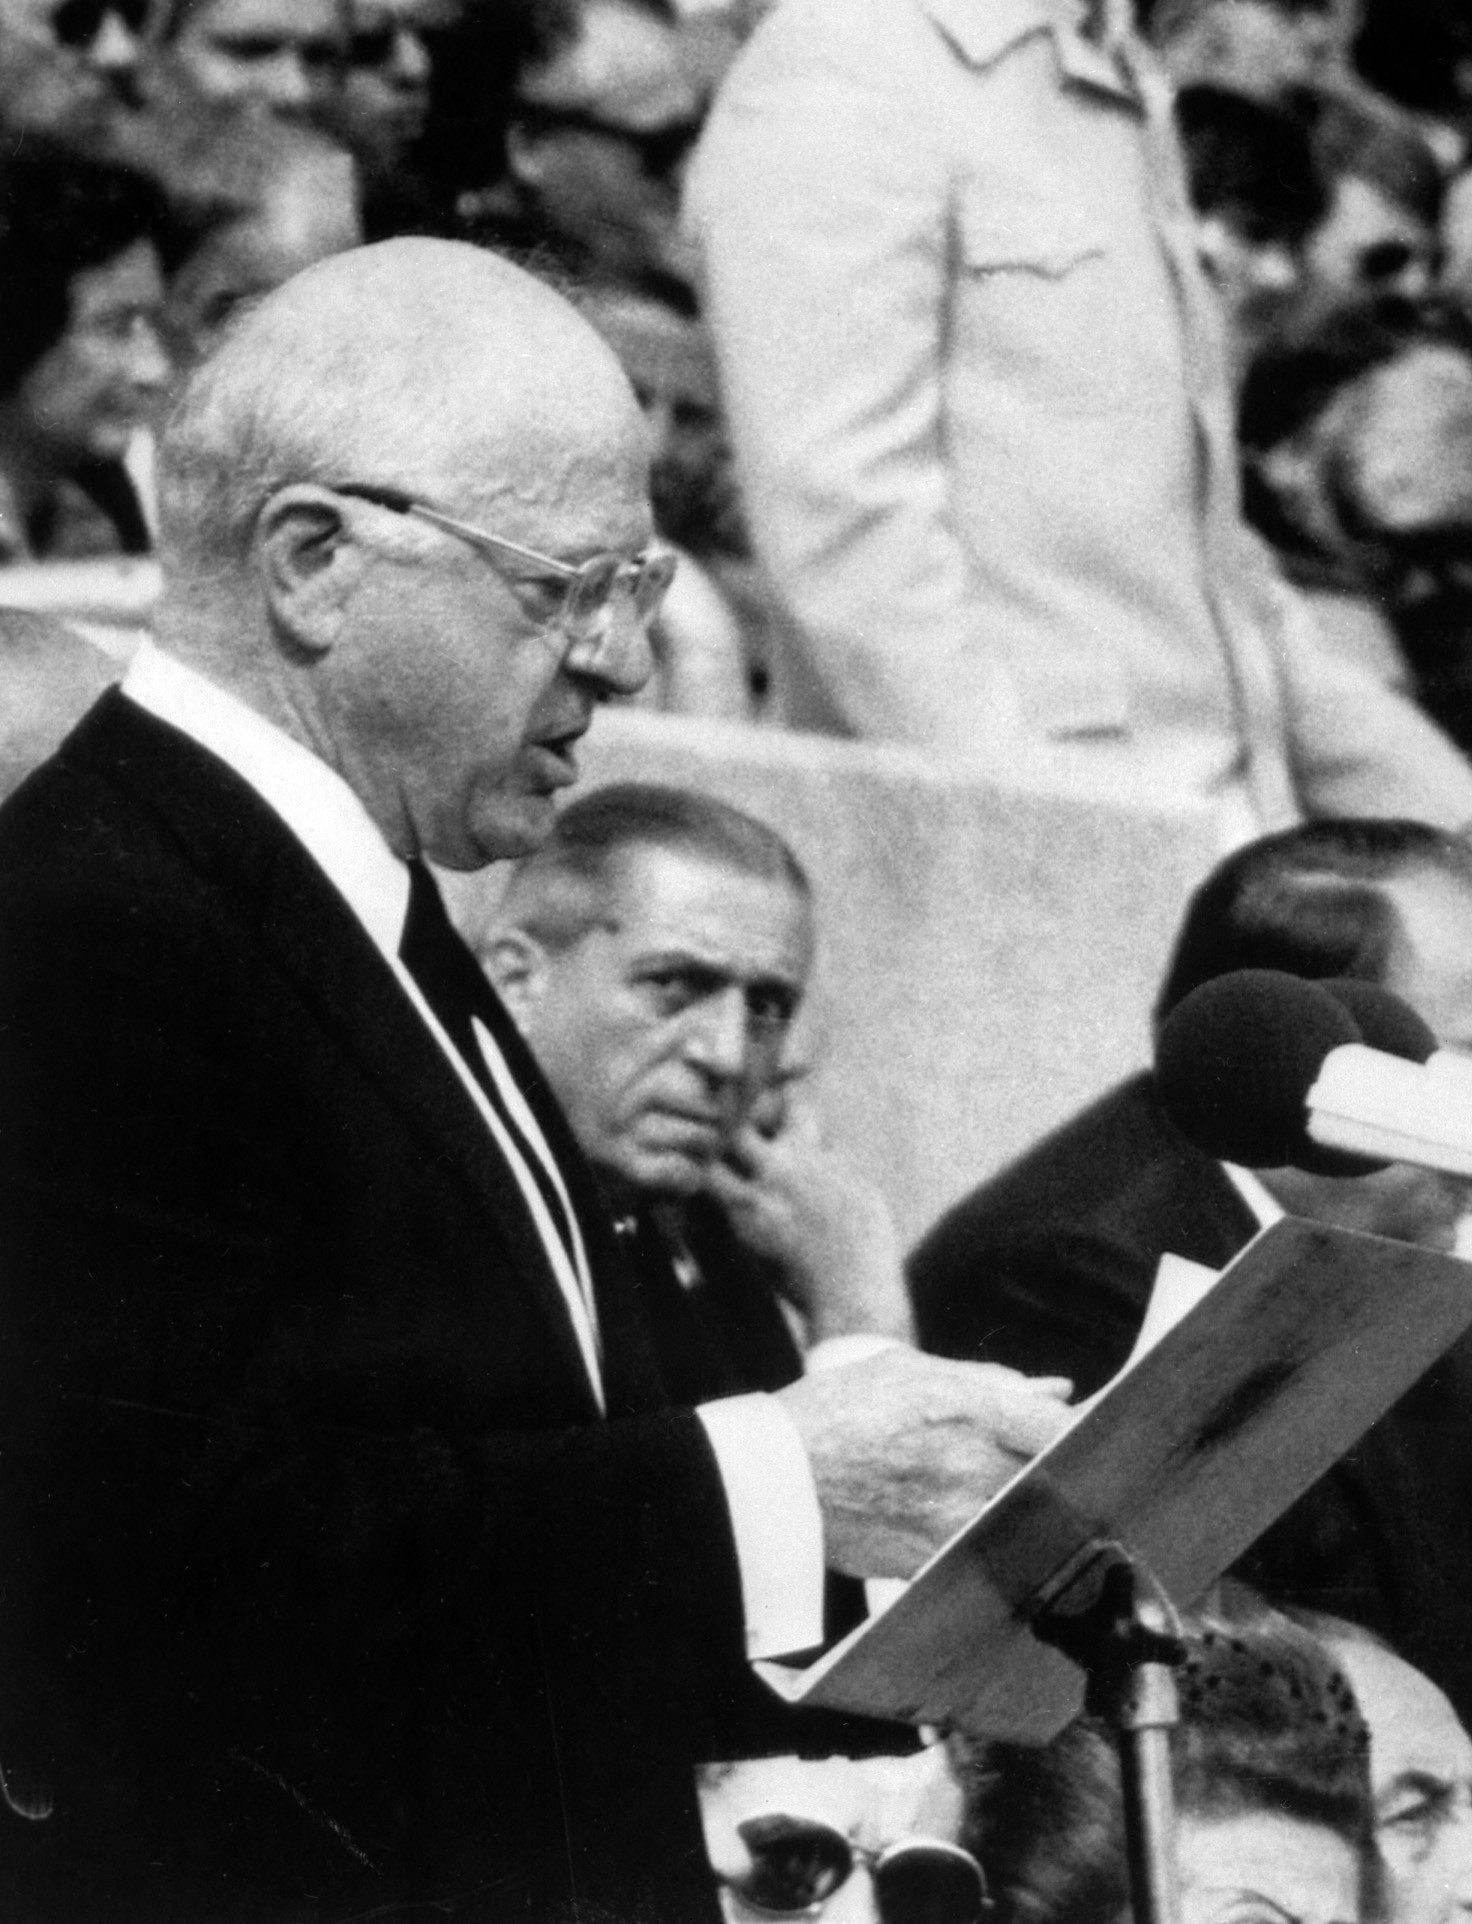 IOC President Avery Brundage made a controversial speech at the memorial service in 1972  ©Getty Images